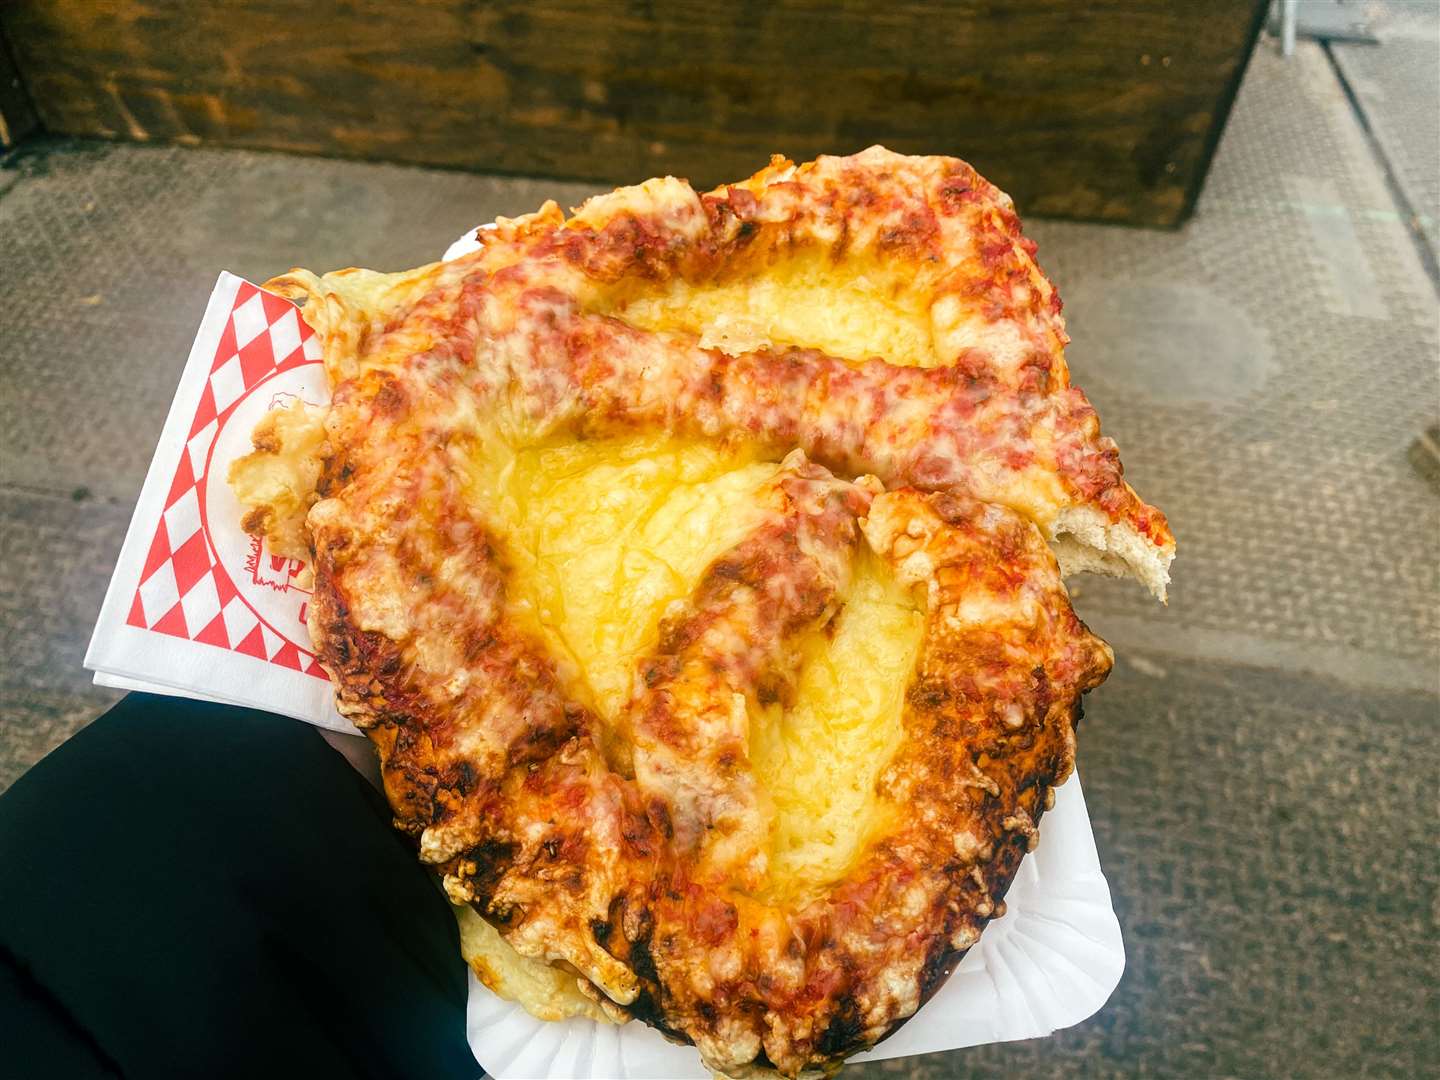 The £7 pizza pretzel is pretty much what you expect - a soft pretzel topped with tomato sauce and cheese